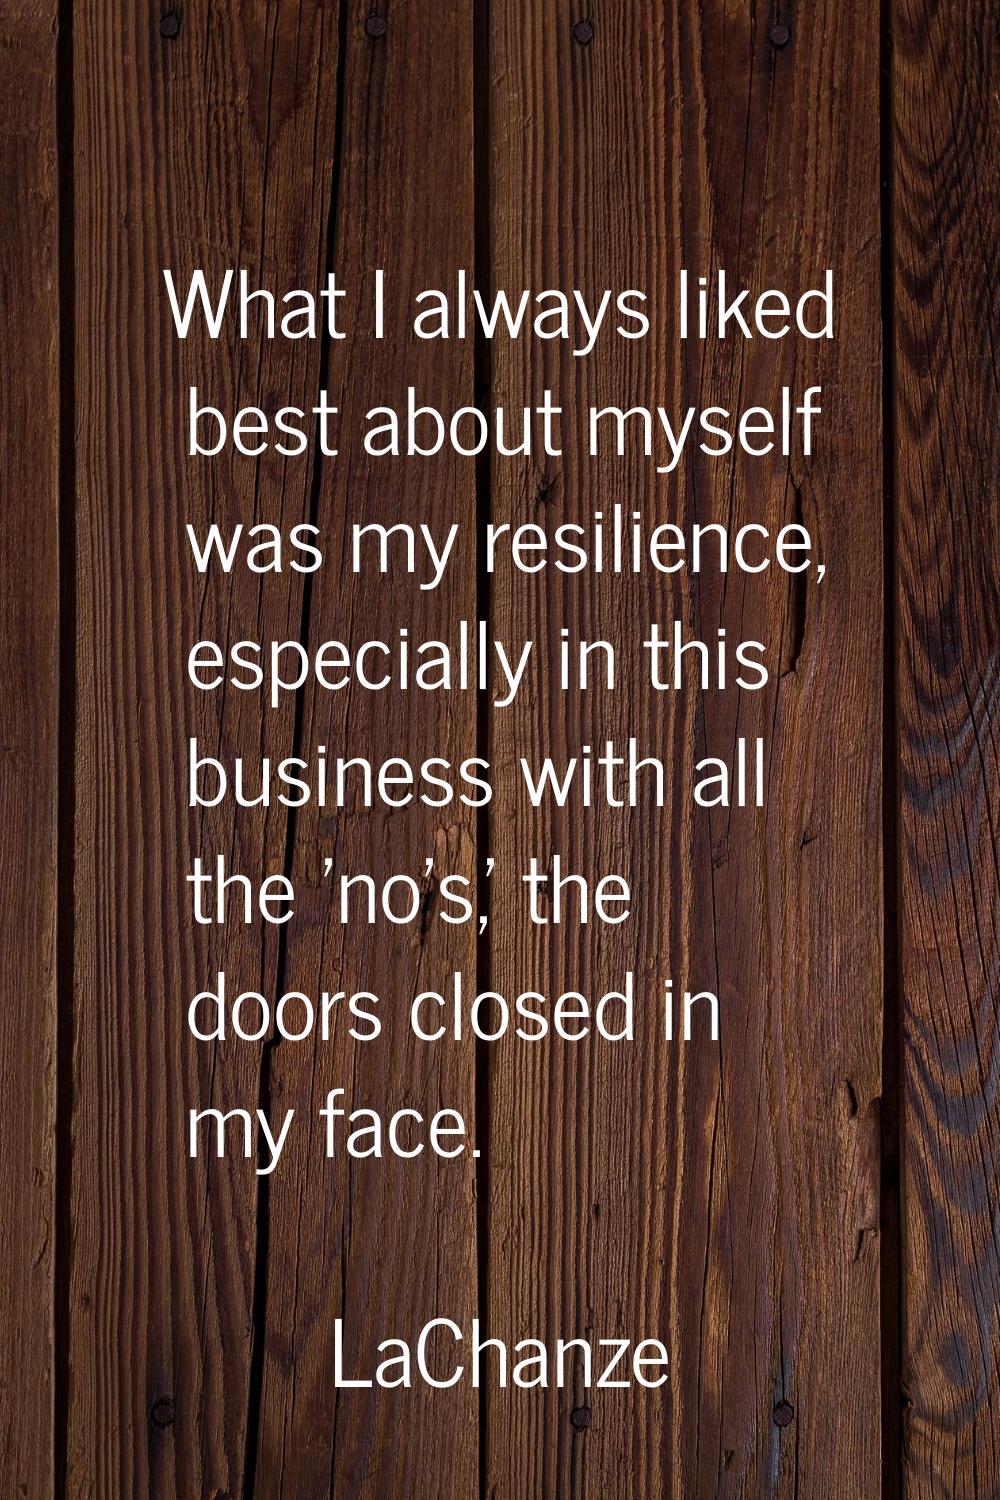 What I always liked best about myself was my resilience, especially in this business with all the '